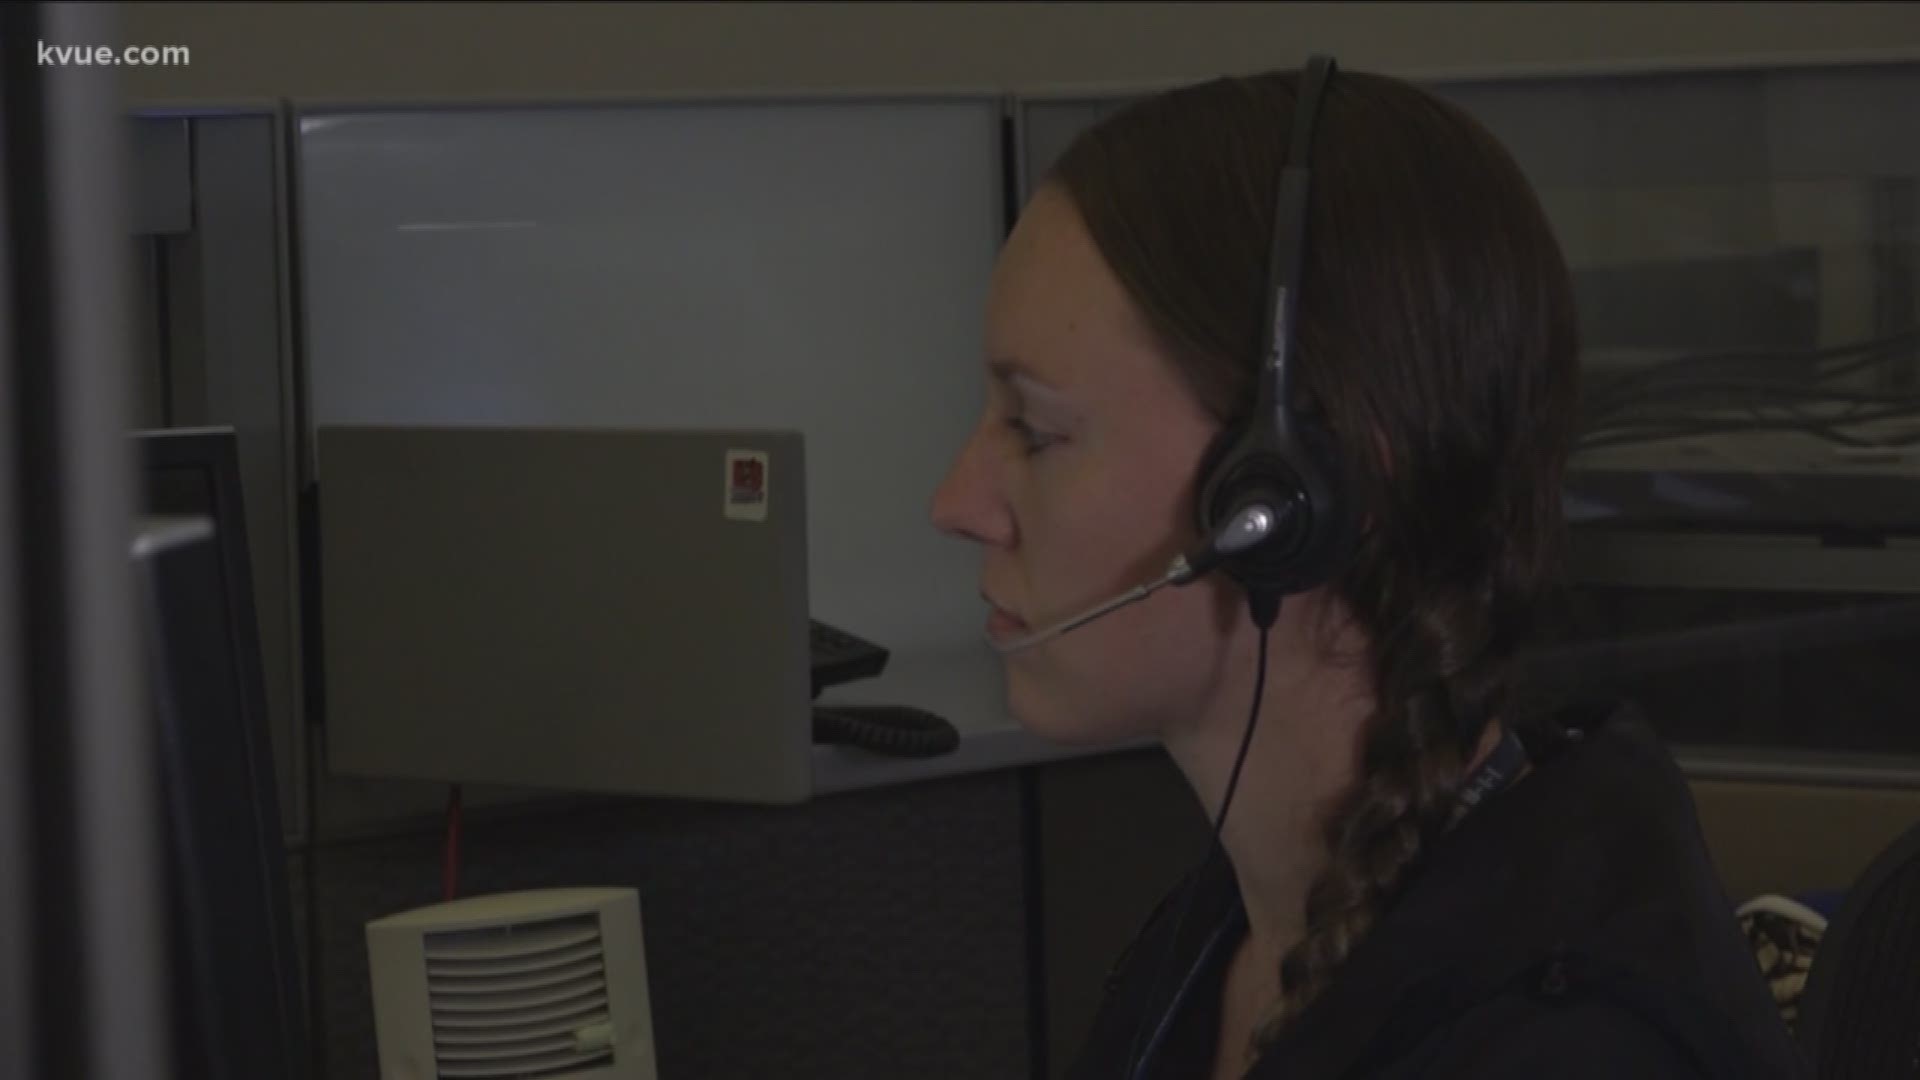 911 operators and dispatchers are people who help save lives but rarely get recognized for it.